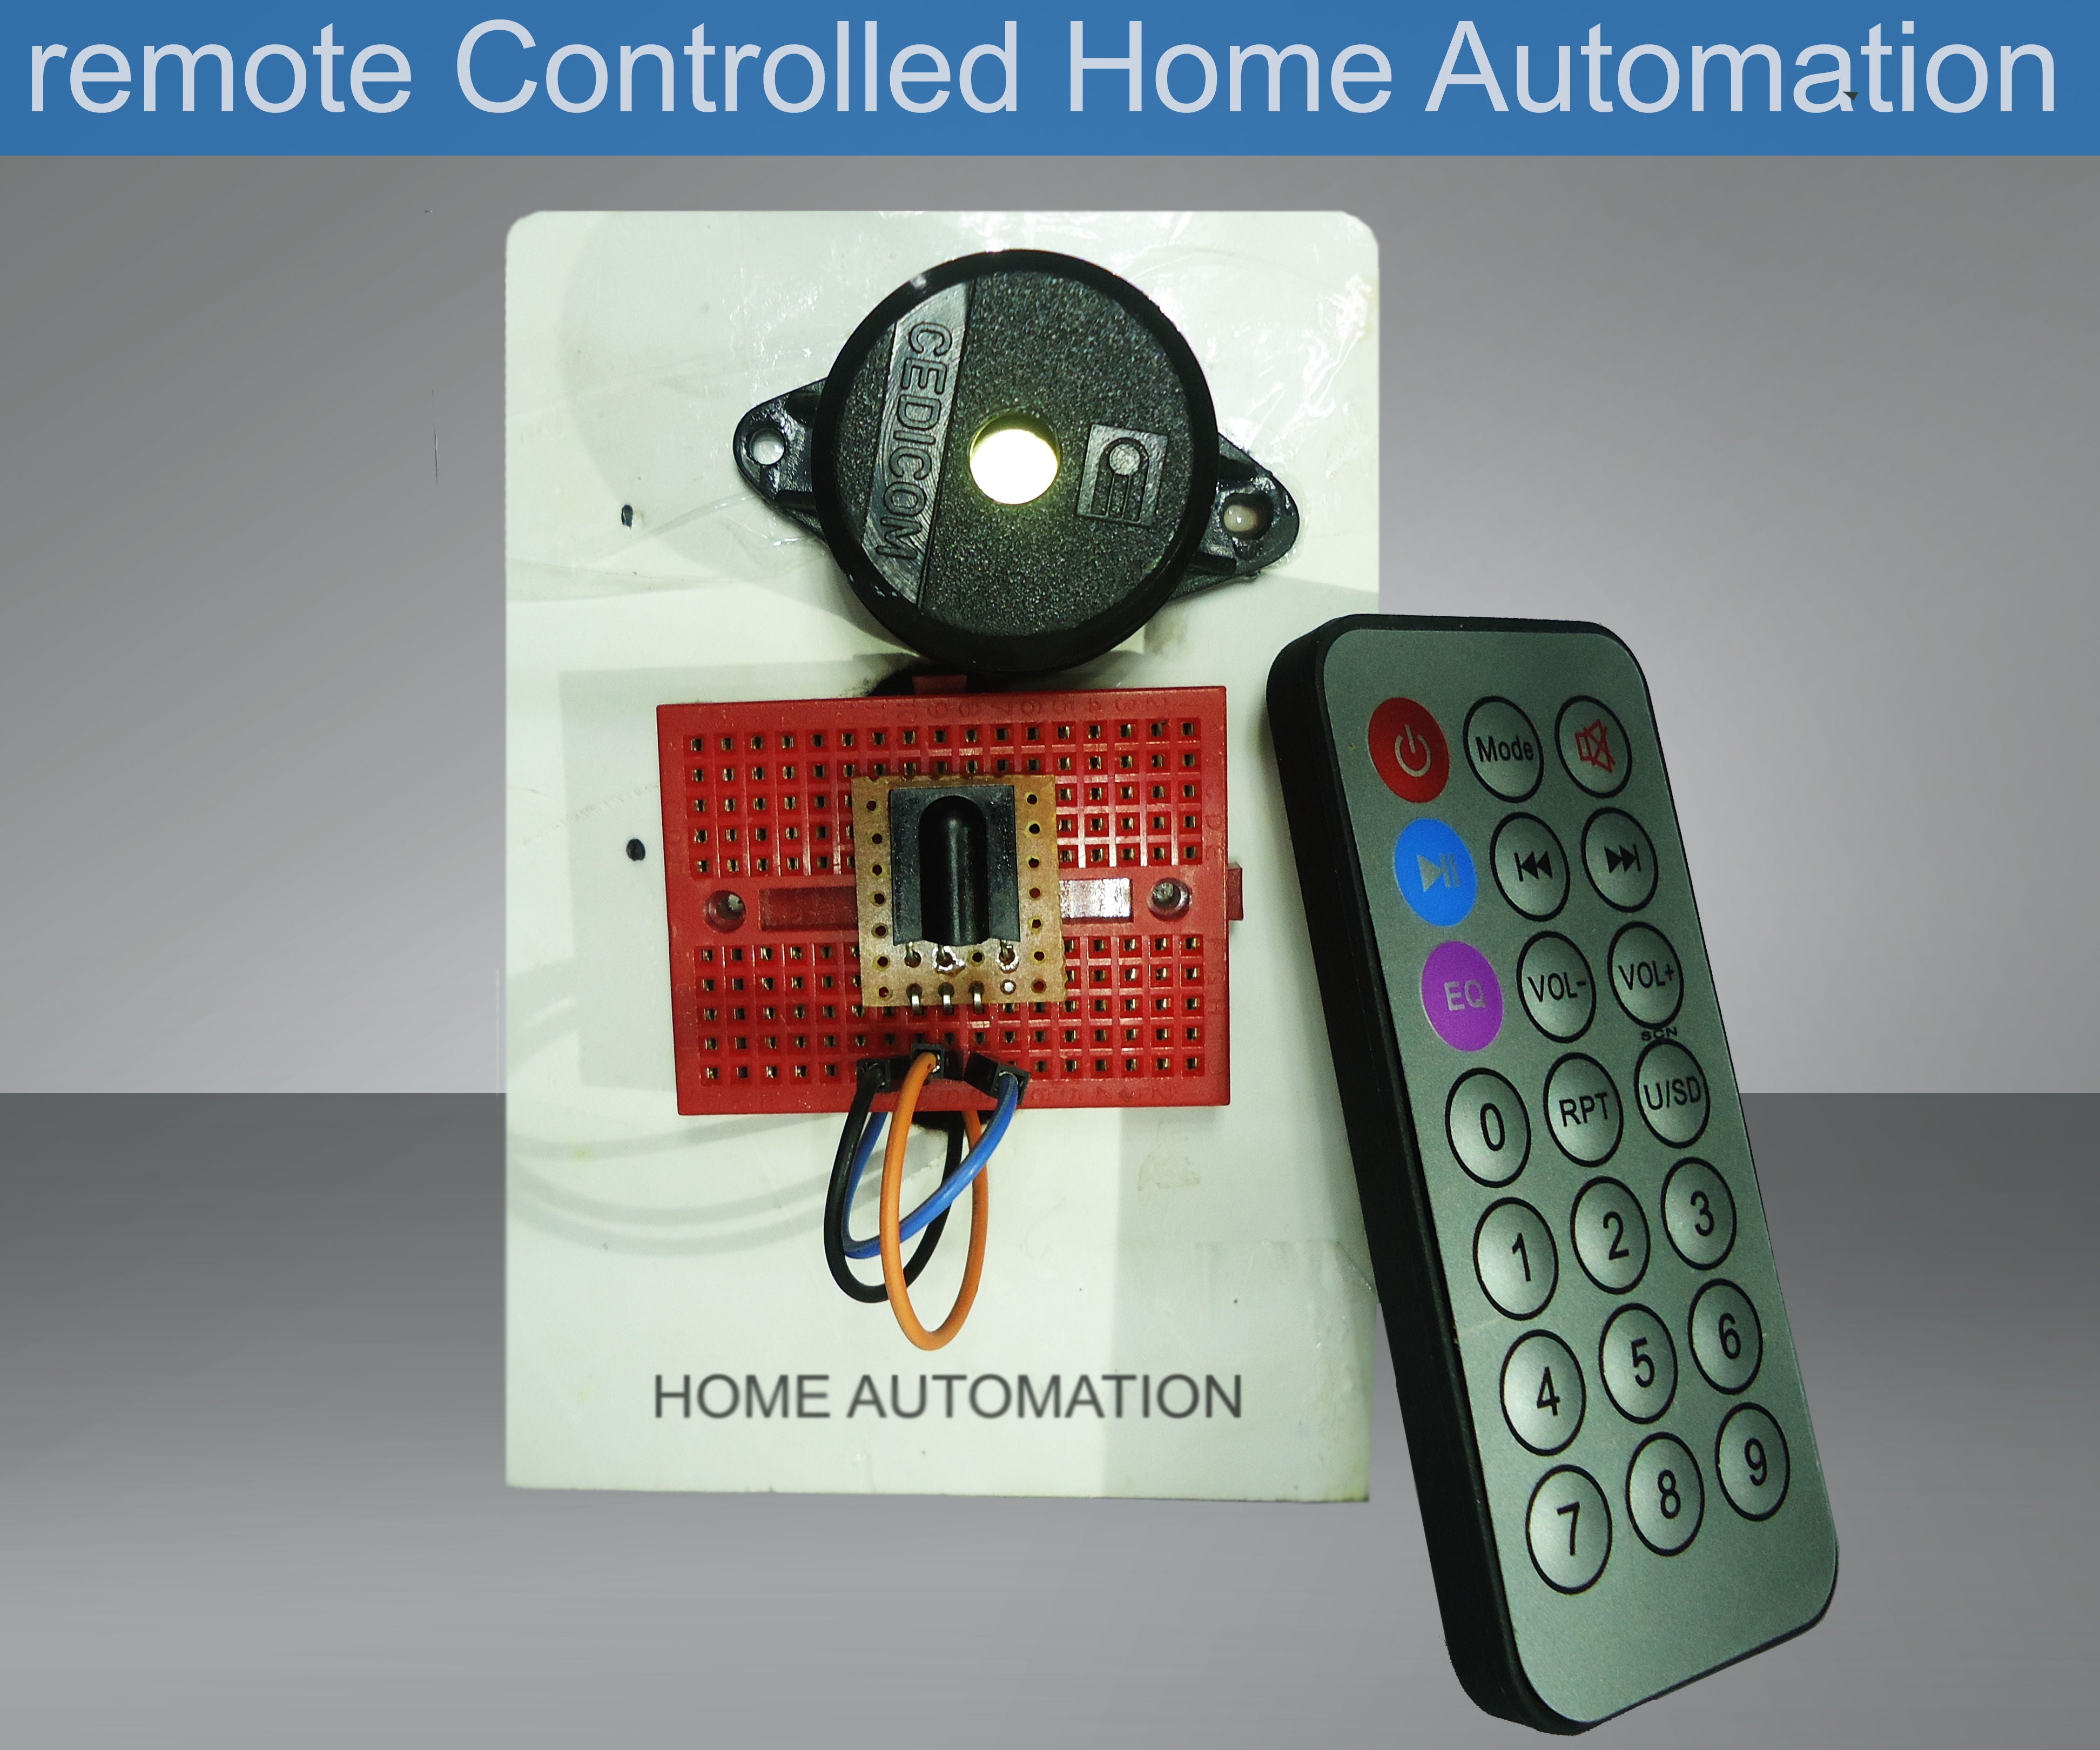 IR Remote Controlled Home Automation